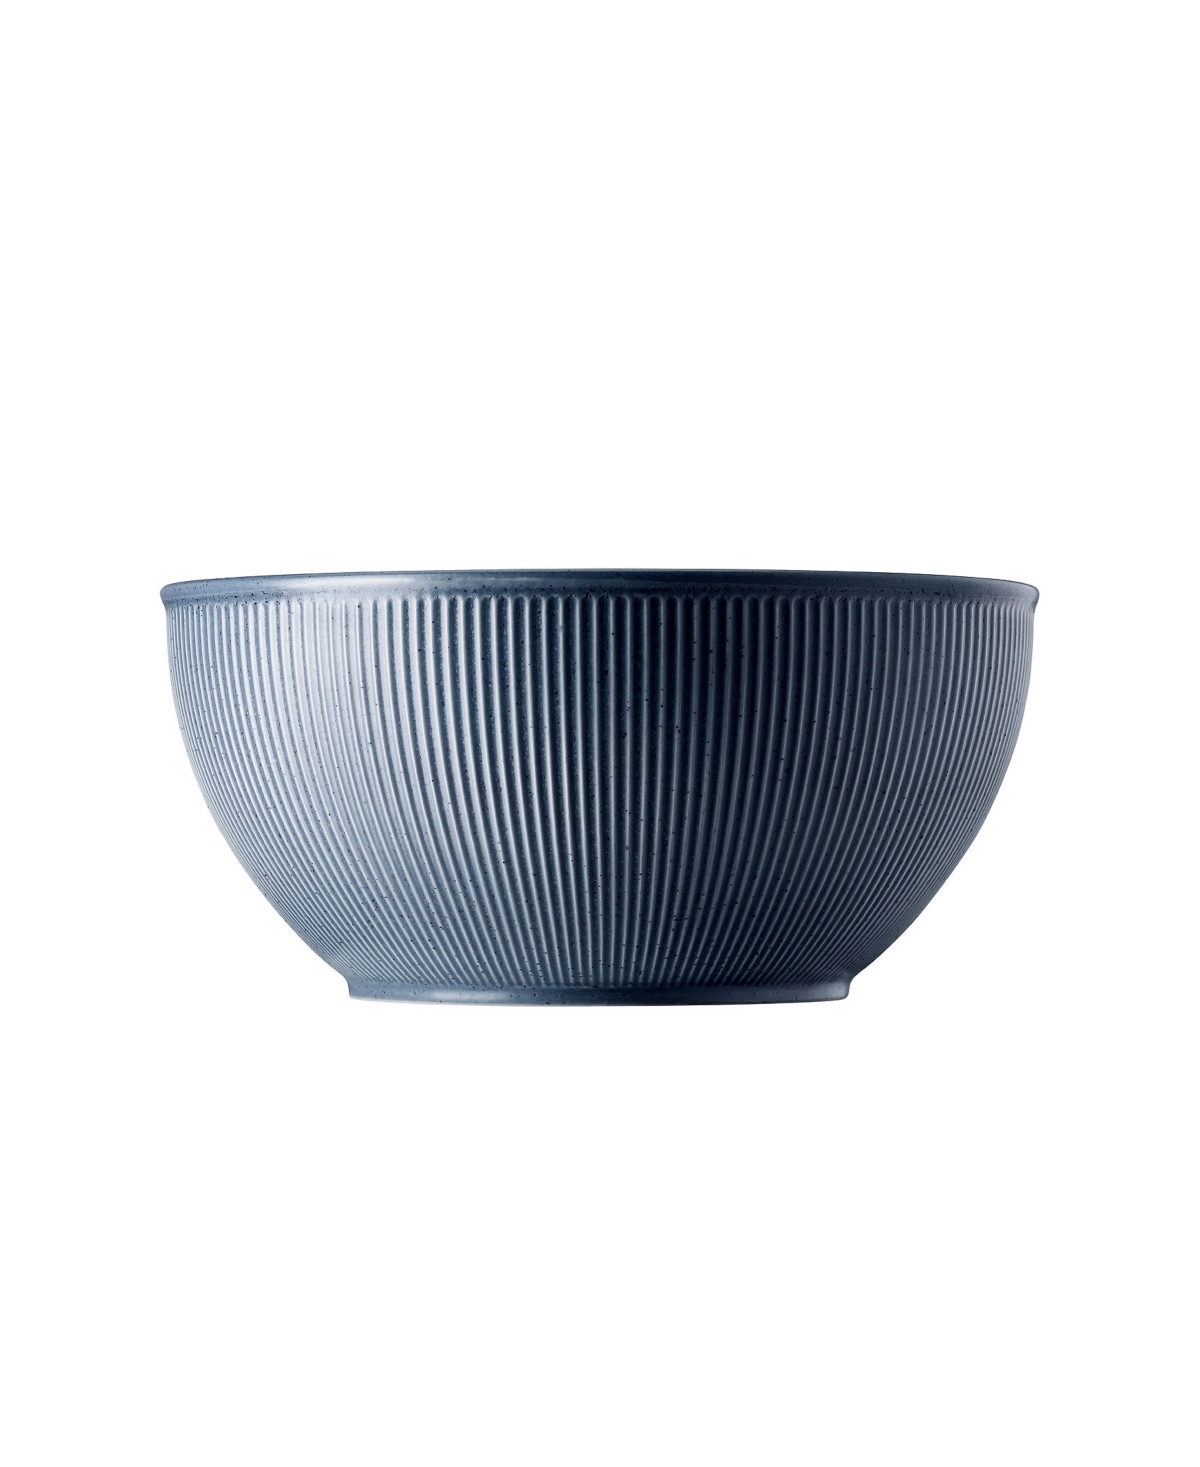 Rosenthal Clay Serve Bowl 9.5" In Gray